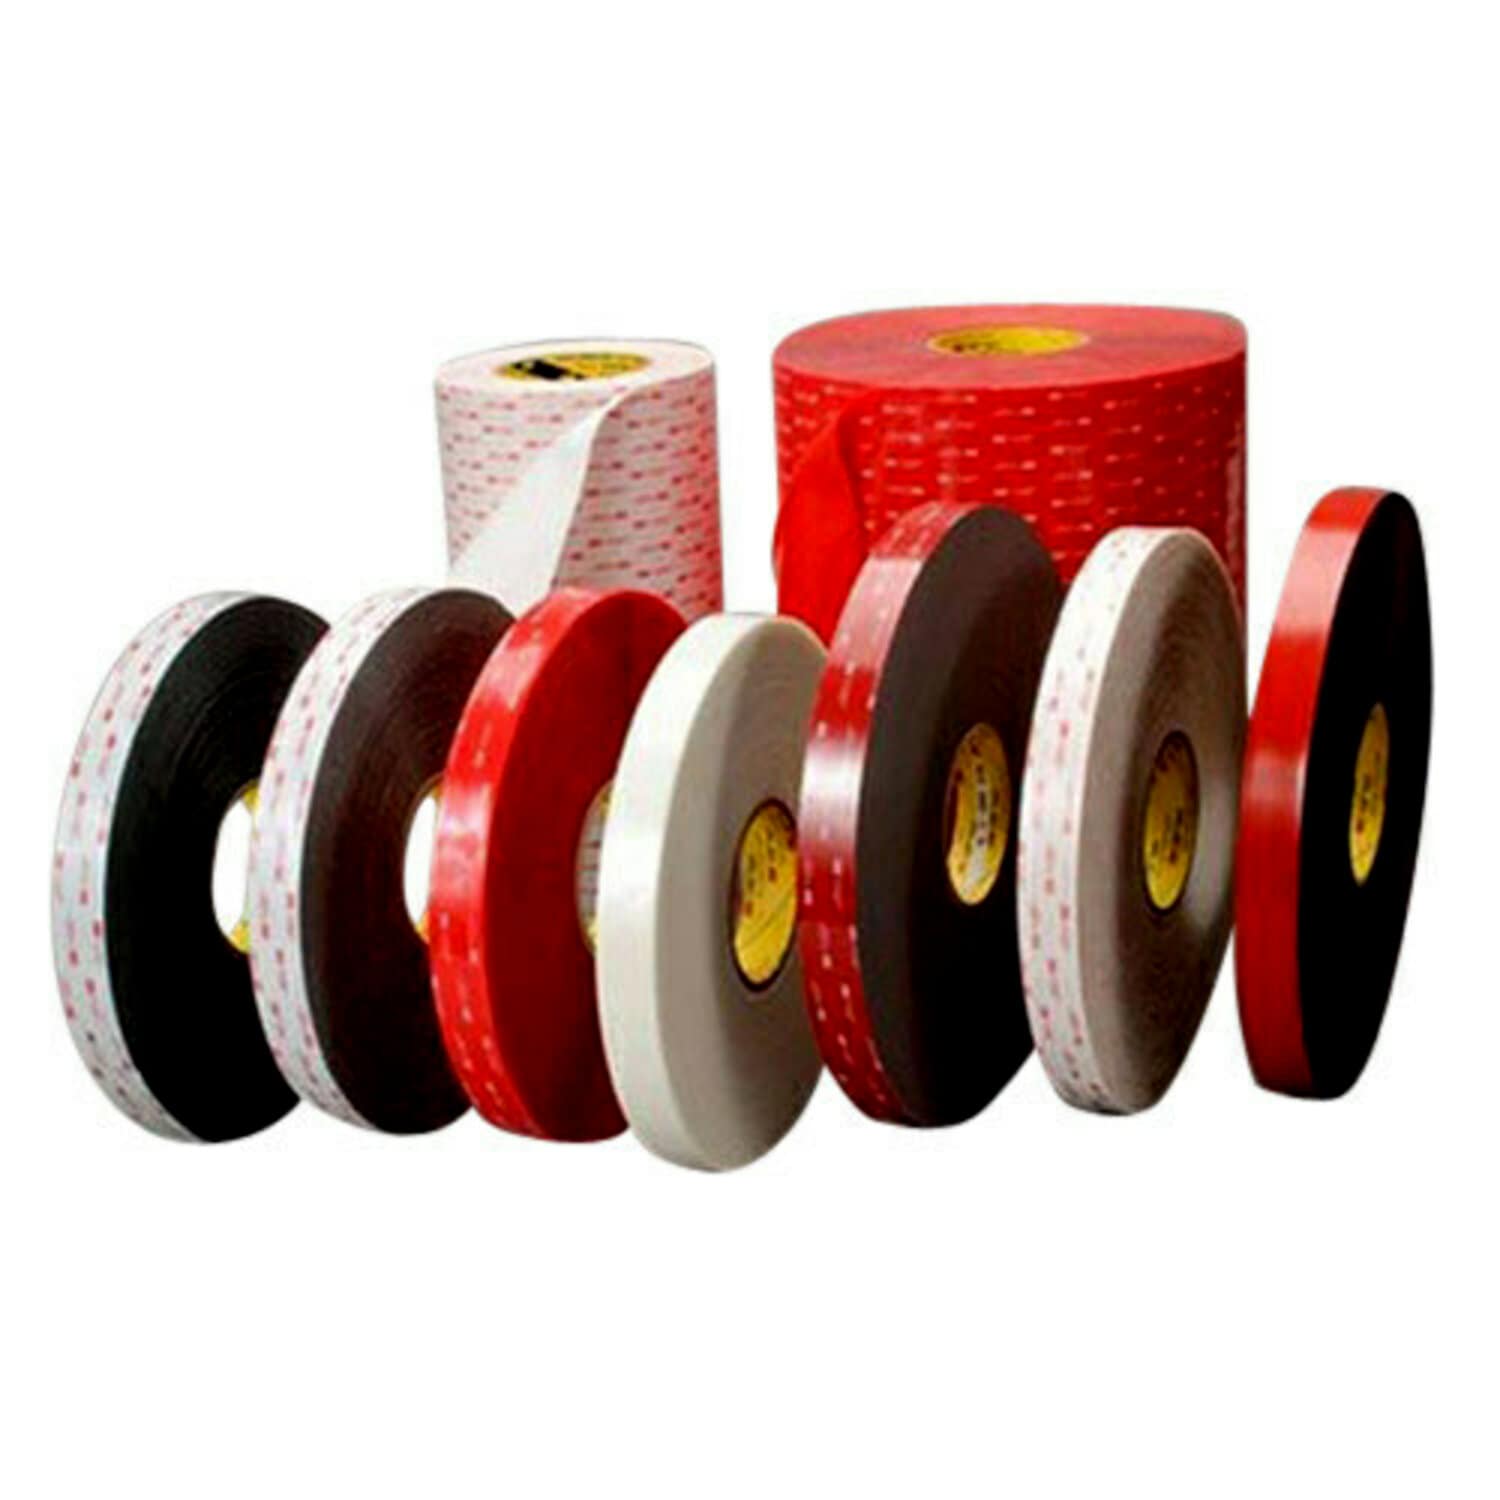 CLEAR 3M VHB™ DOUBLE SIDED Self Adhesive Sticky TAPE Acrylic